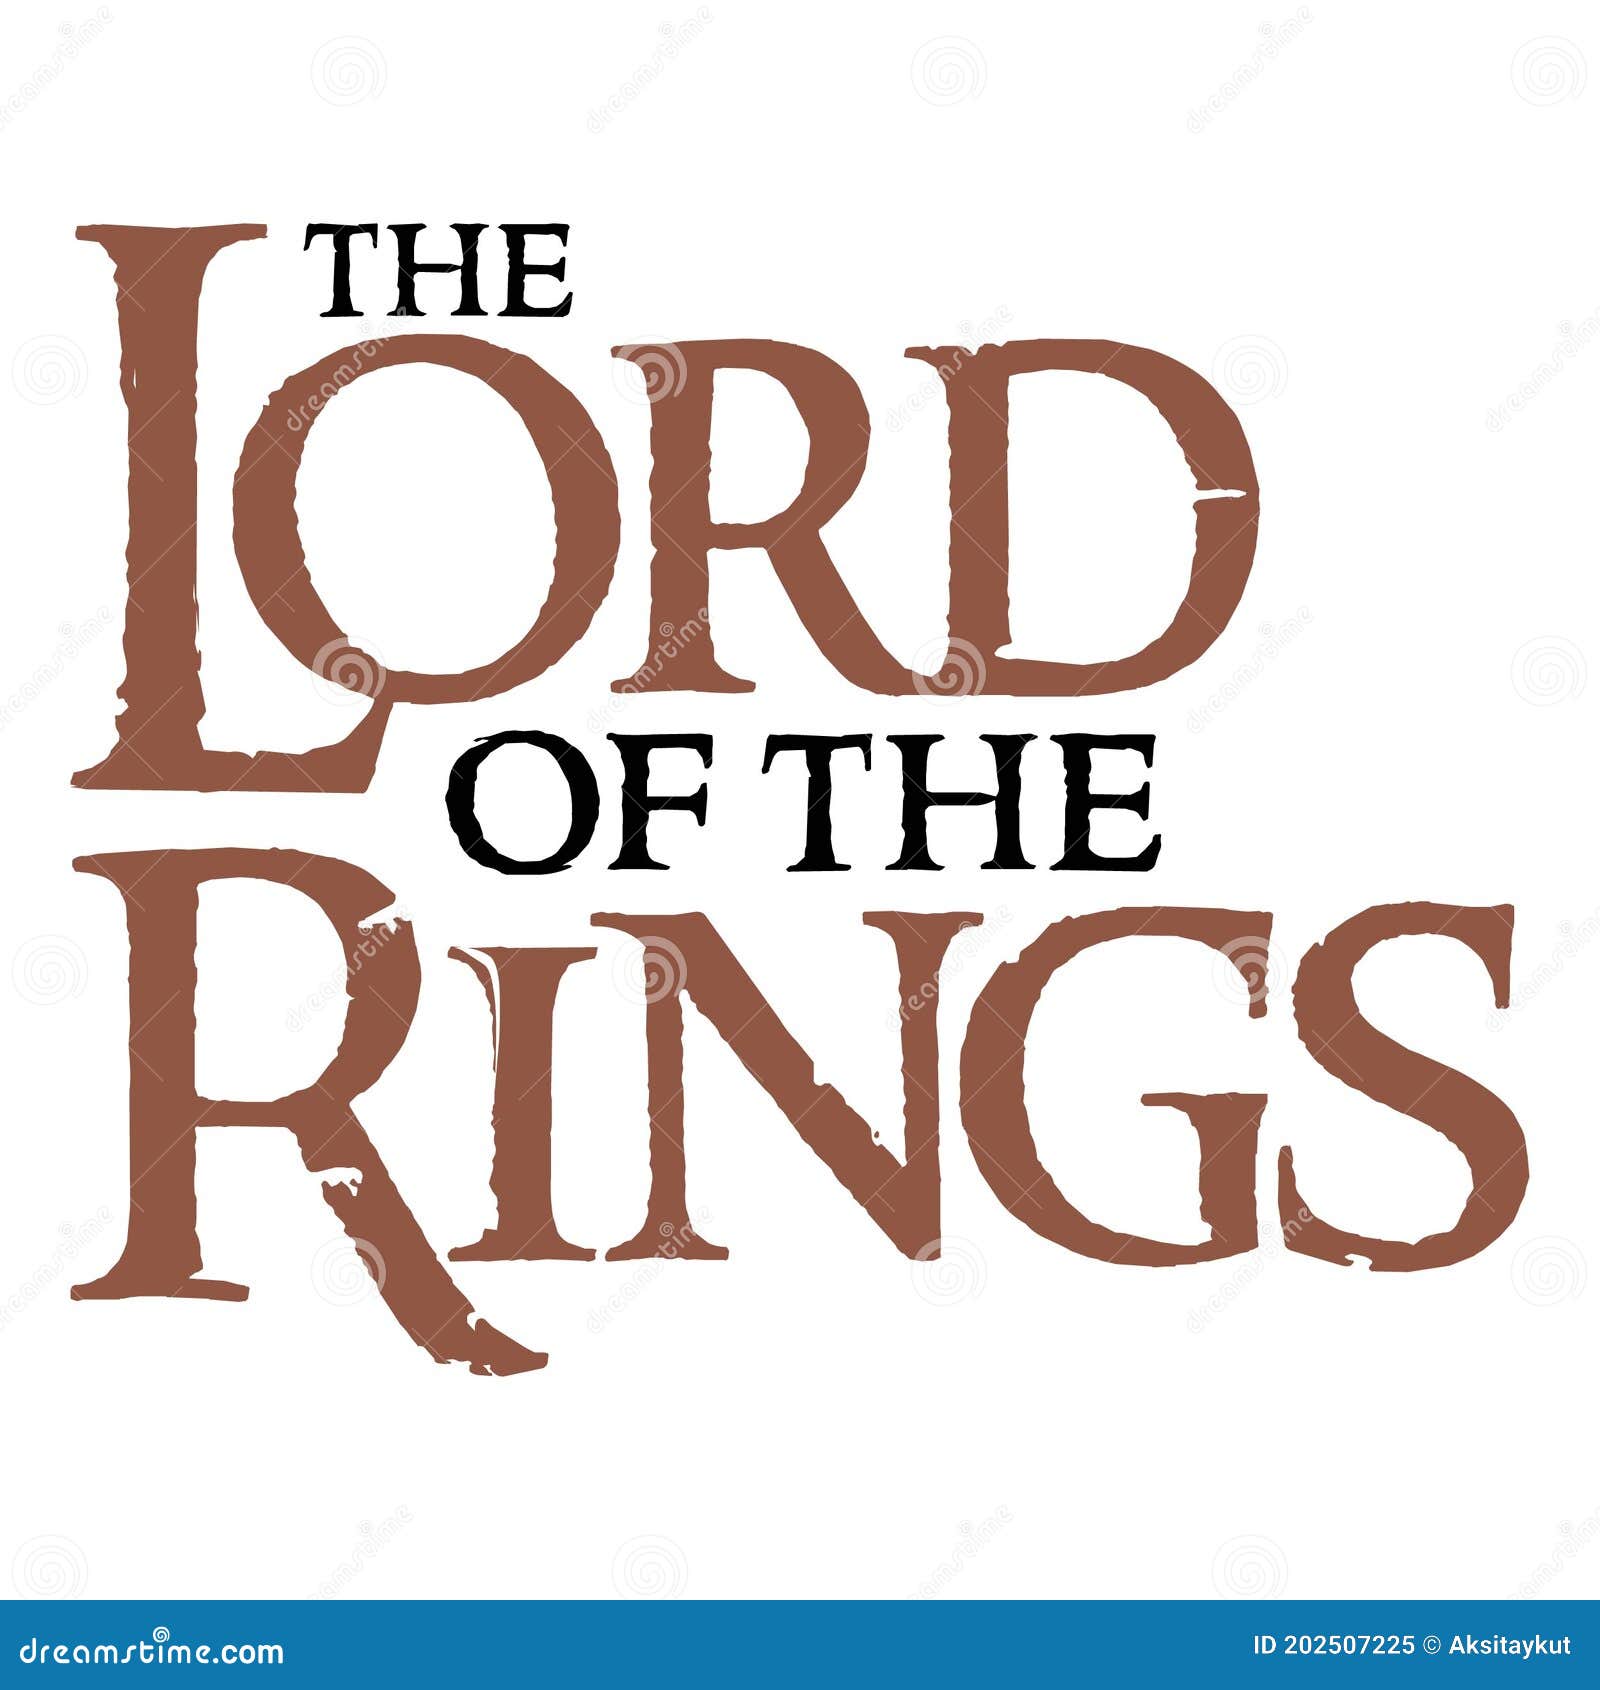 Things we love in new LEGO The Lord of the Rings minifigures